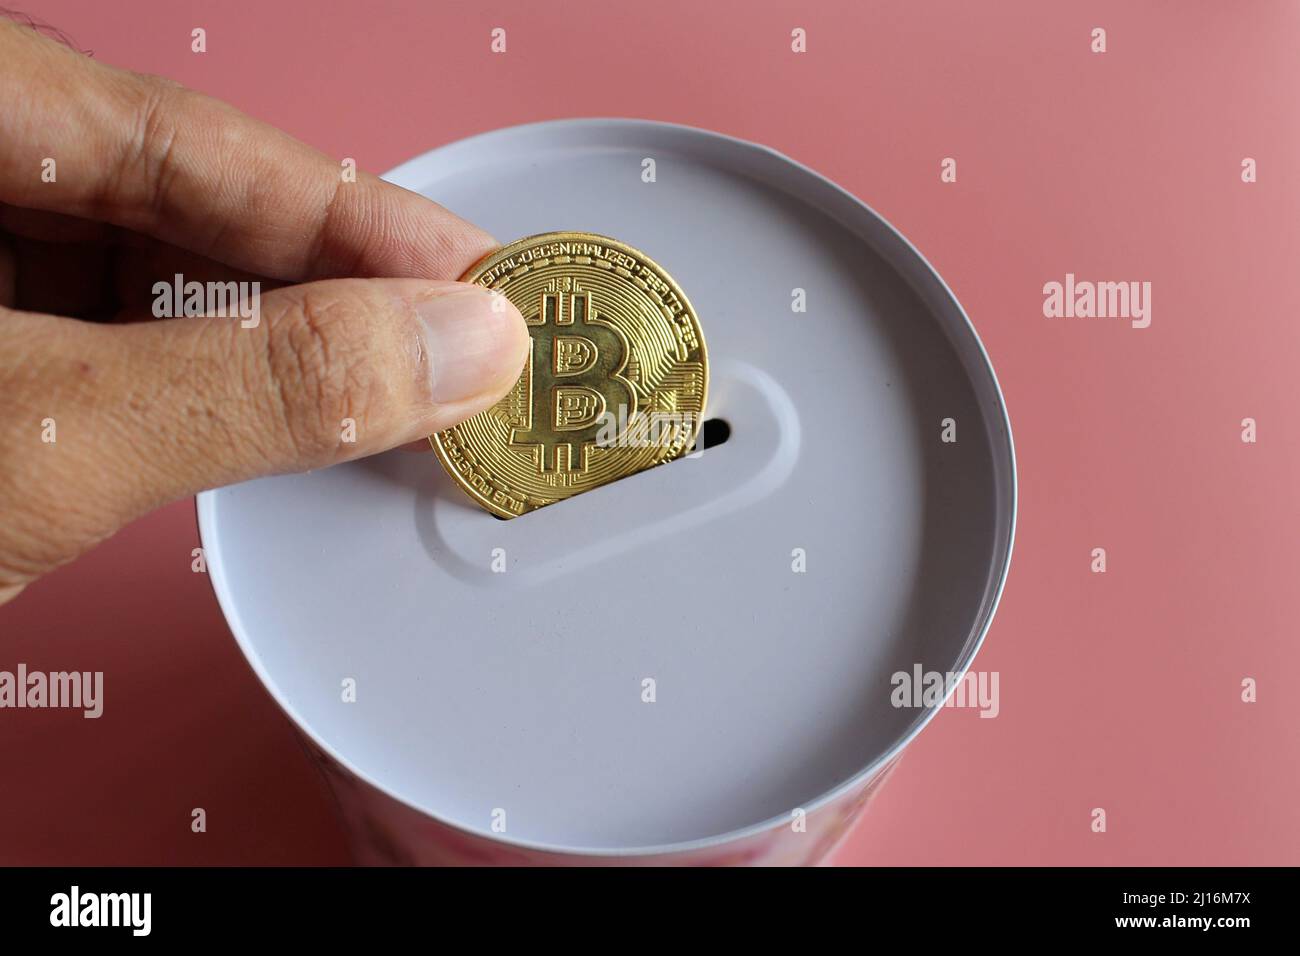 Hand put Bitcoin into donation box. Pink background. Cryptocurrency and donation concept. Stock Photo